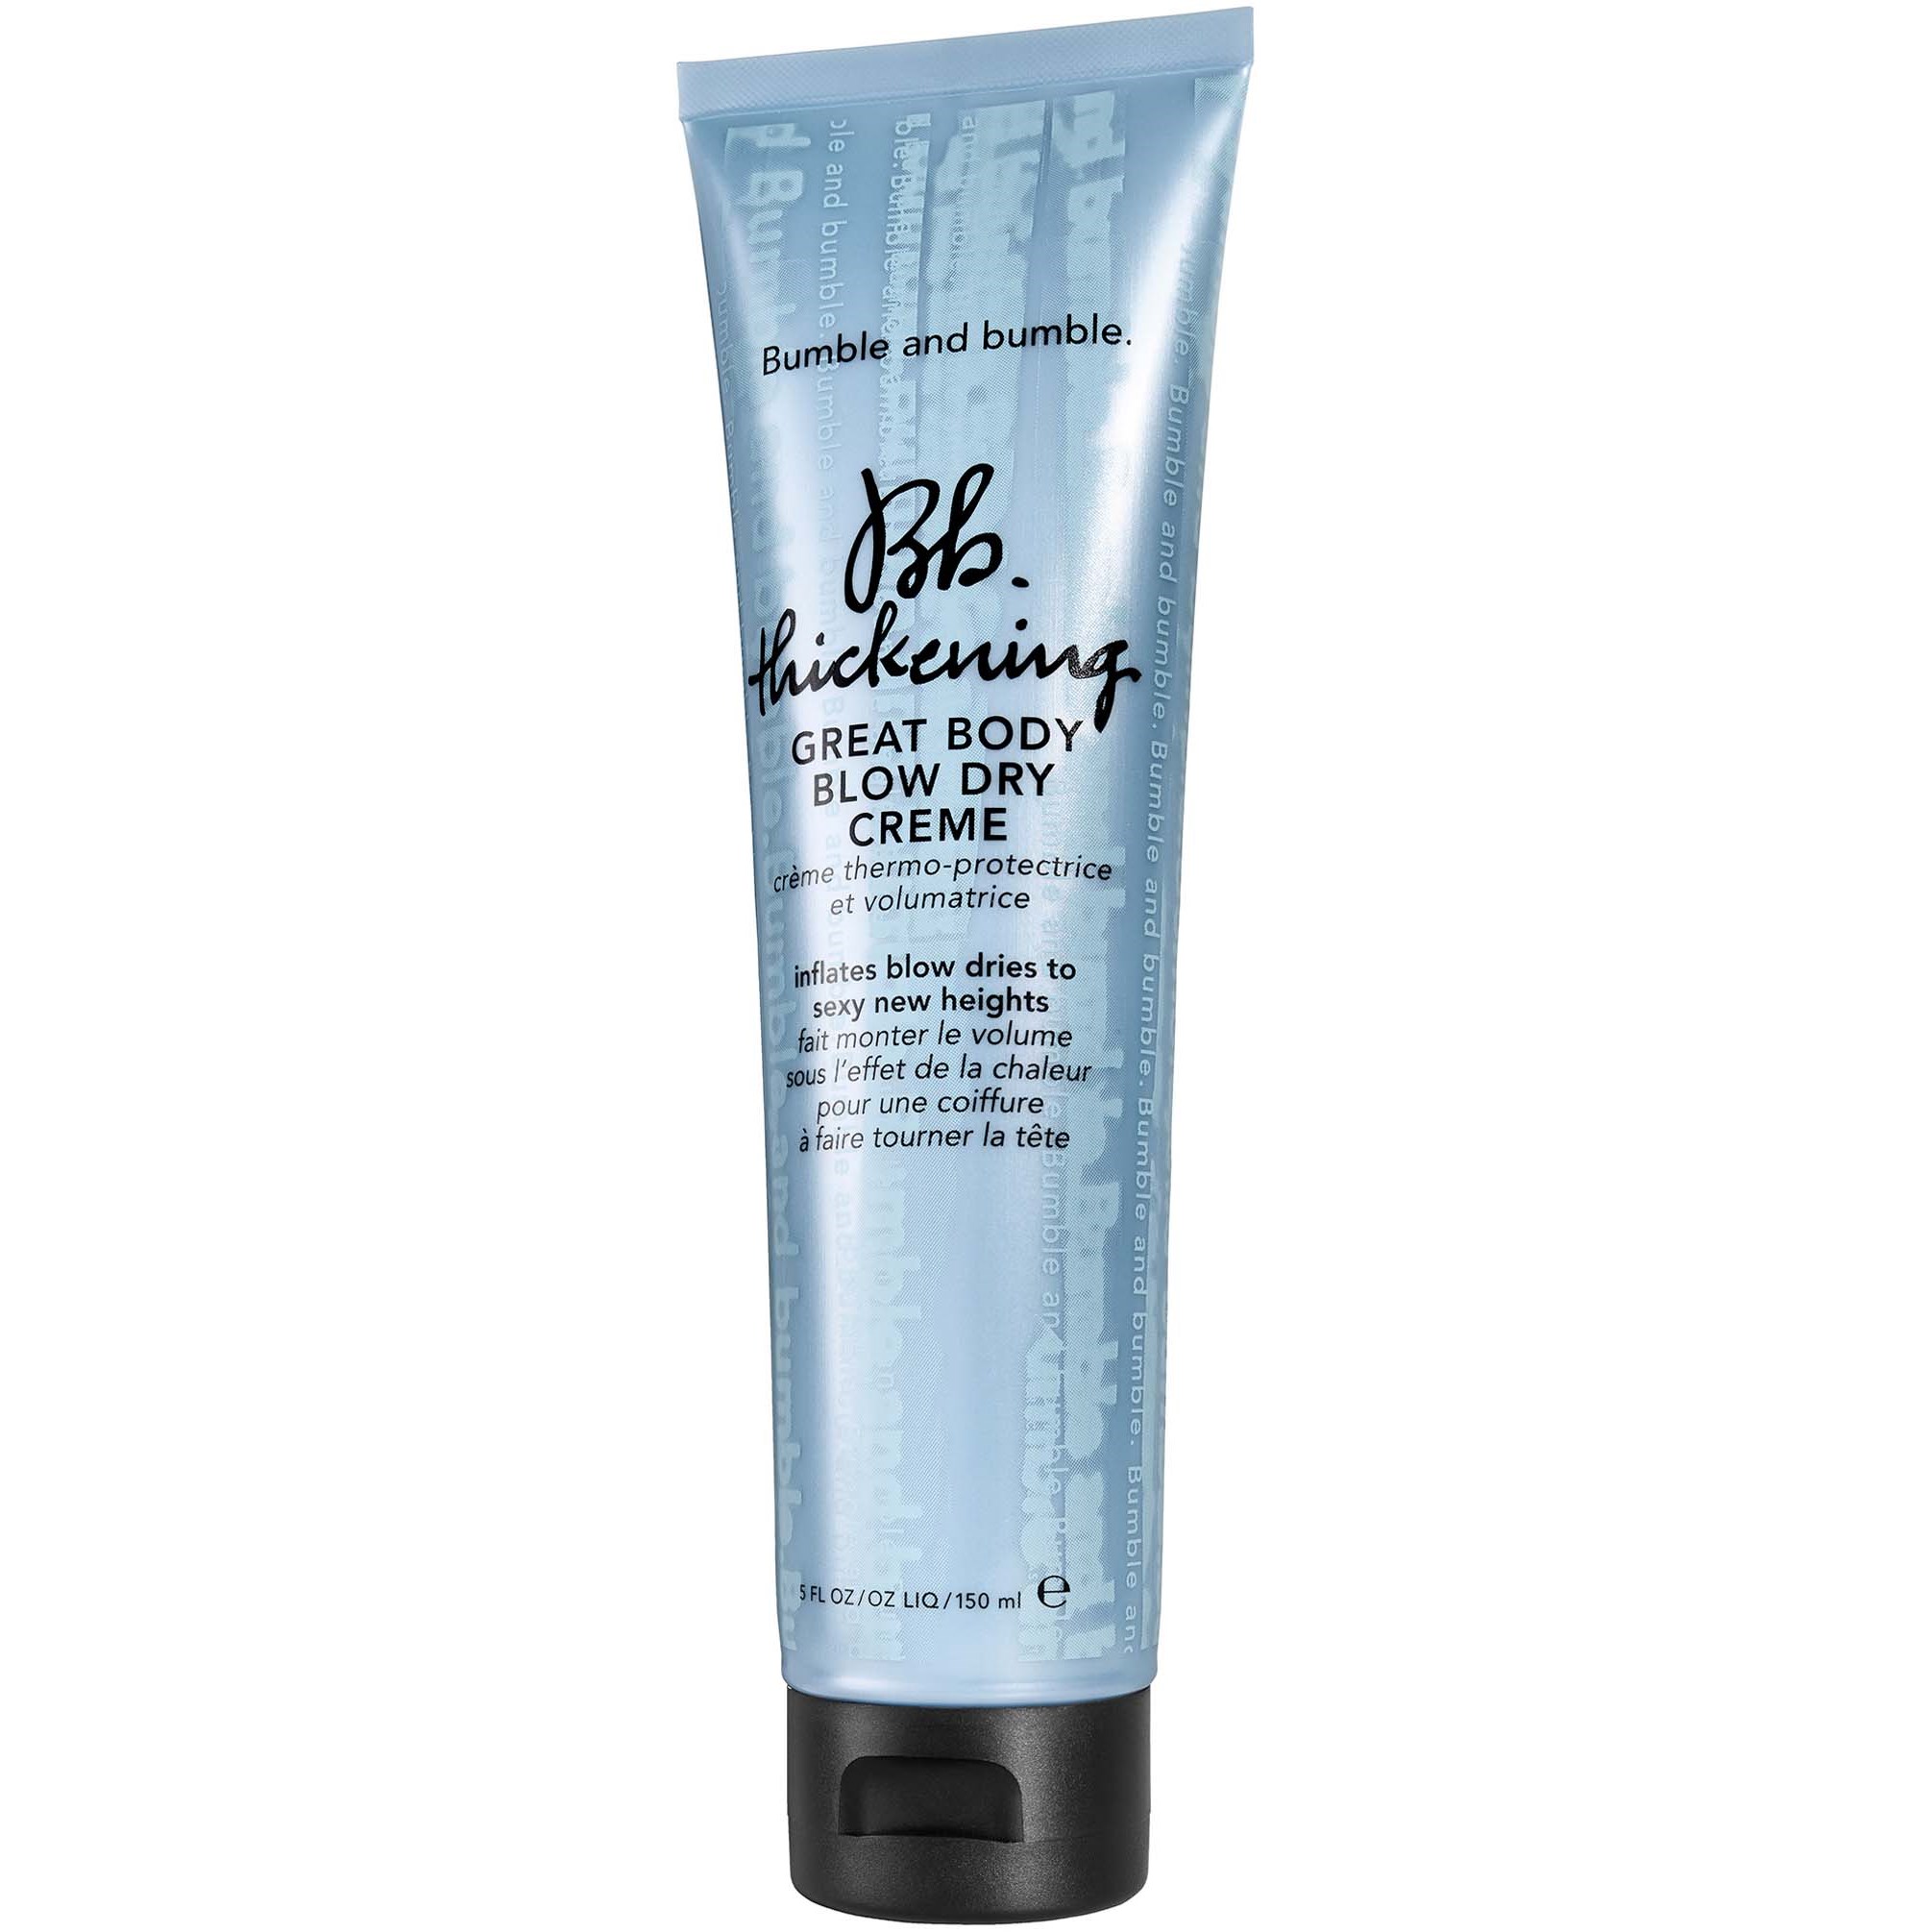 Läs mer om Bumble and bumble Thickening Great Body Blow Dry 150 ml